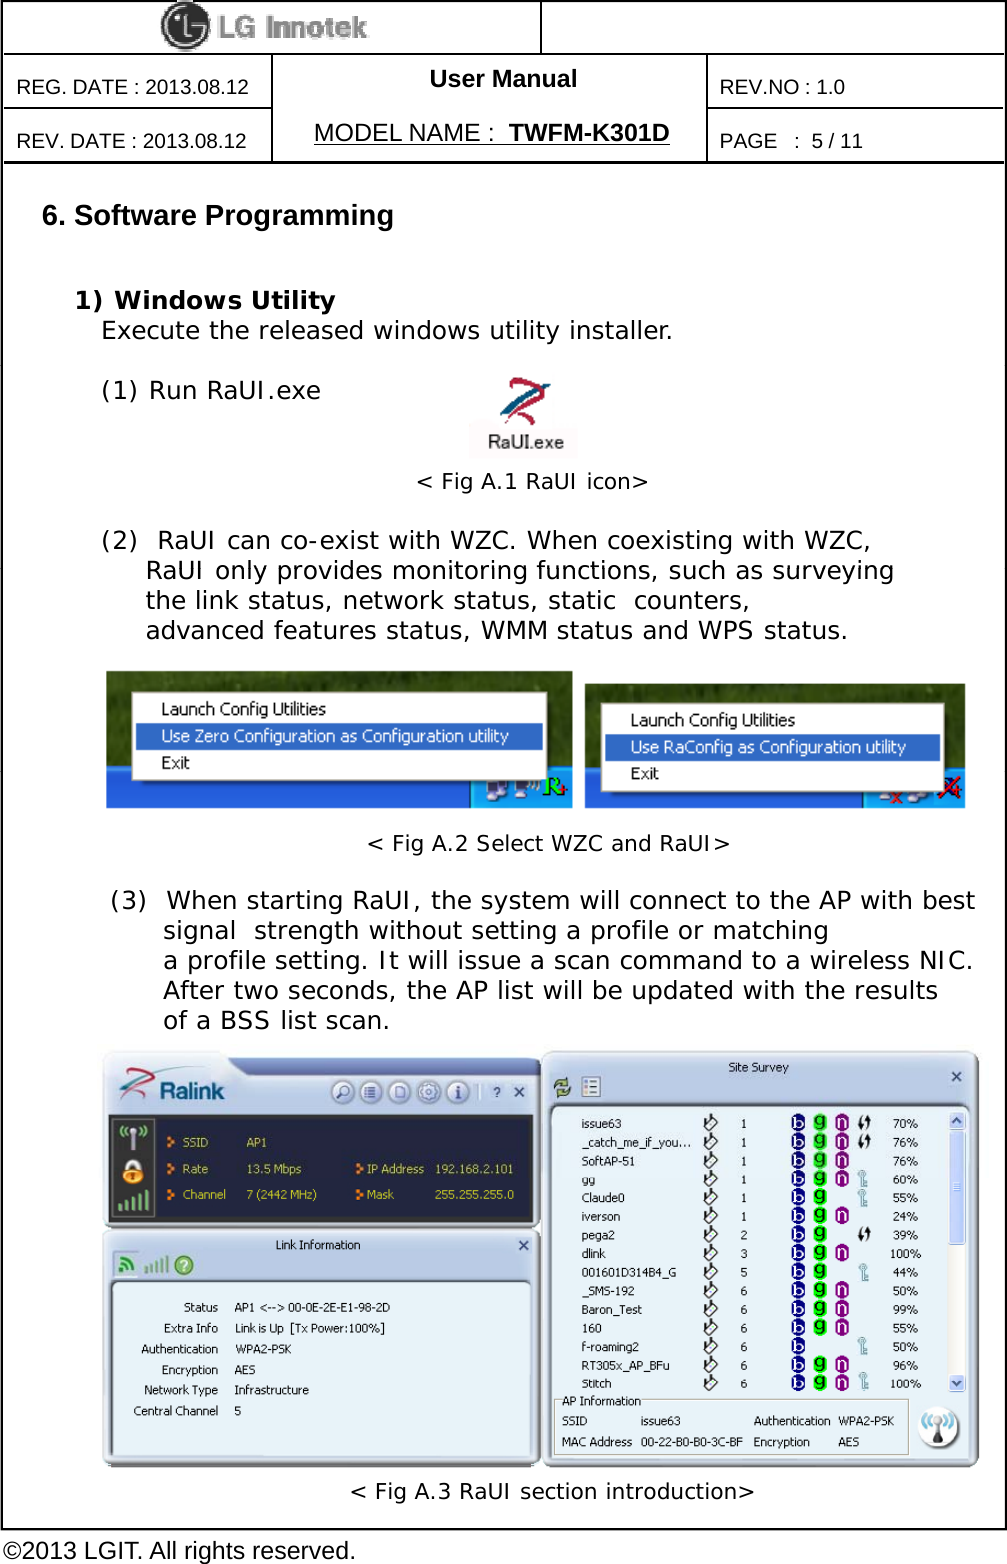 User ManualPAGE   :REG. DATE : 2013.08.12MODEL NAME : TWFM-K301DREV. DATE : 2013.08.12REV.NO : 1.05/ 116. Software Programming1) Windows UtilityExecute the released windows utility installer.(1) Run RaUI.exe(2)  RaUI can co-exist with WZC. When coexisting with WZC, RaUI only provides monitoring functions  such as surveying &lt; Fig A.1 RaUI icon&gt;RaUI only provides monitoring functions, such as surveying the link status, network status, static  counters, advanced features status, WMM status and WPS status.(3)  When starting RaUI, the system will connect to the AP with best signal  strength without setting a profile or matching a profile setting. It will issue a scan command to a wireless NIC. &lt; Fig A.2 Select WZC and RaUI&gt;After two seconds, the AP list will be updated with the results of a BSS list scan. ©2013 LGIT. All rights reserved.&lt; Fig A.3 RaUI section introduction&gt;